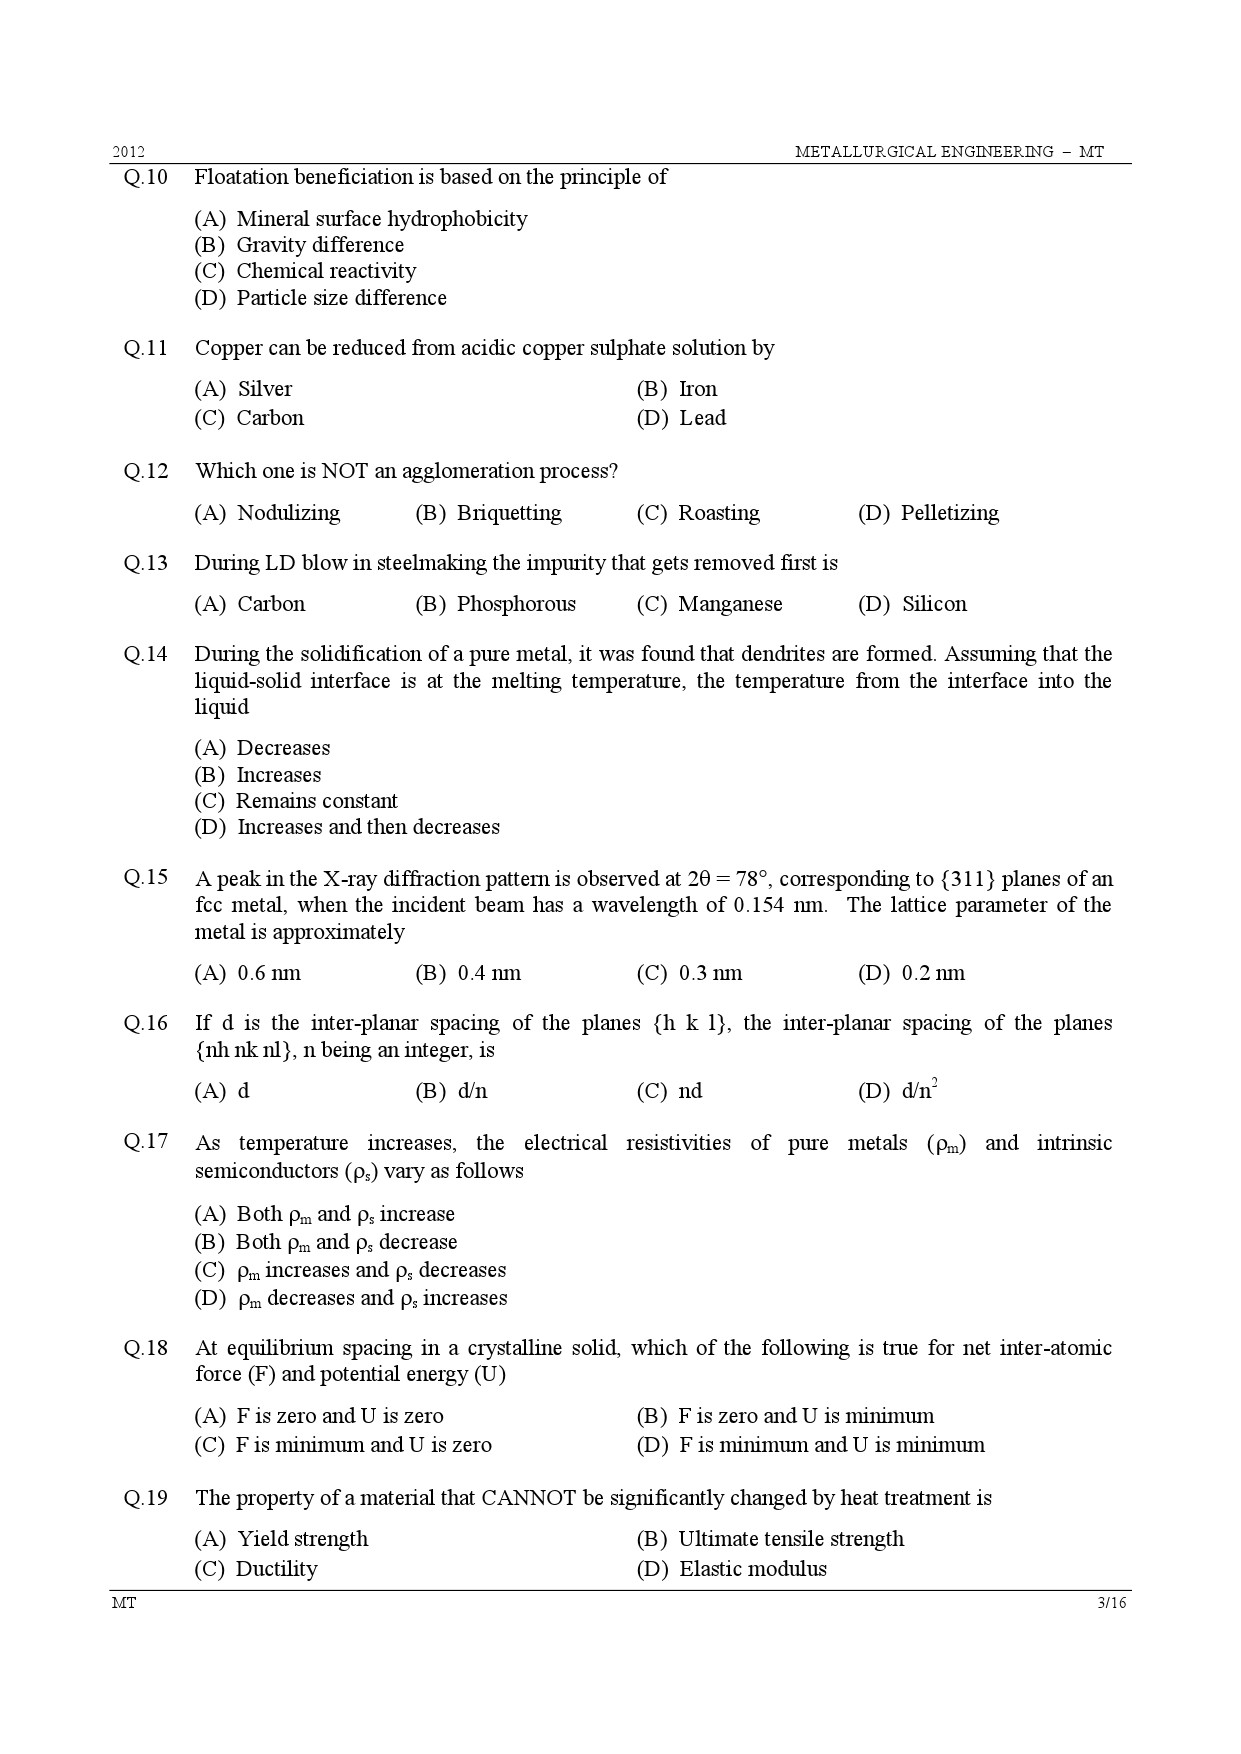 GATE Exam Question Paper 2012 Metallurgical Engineering 3